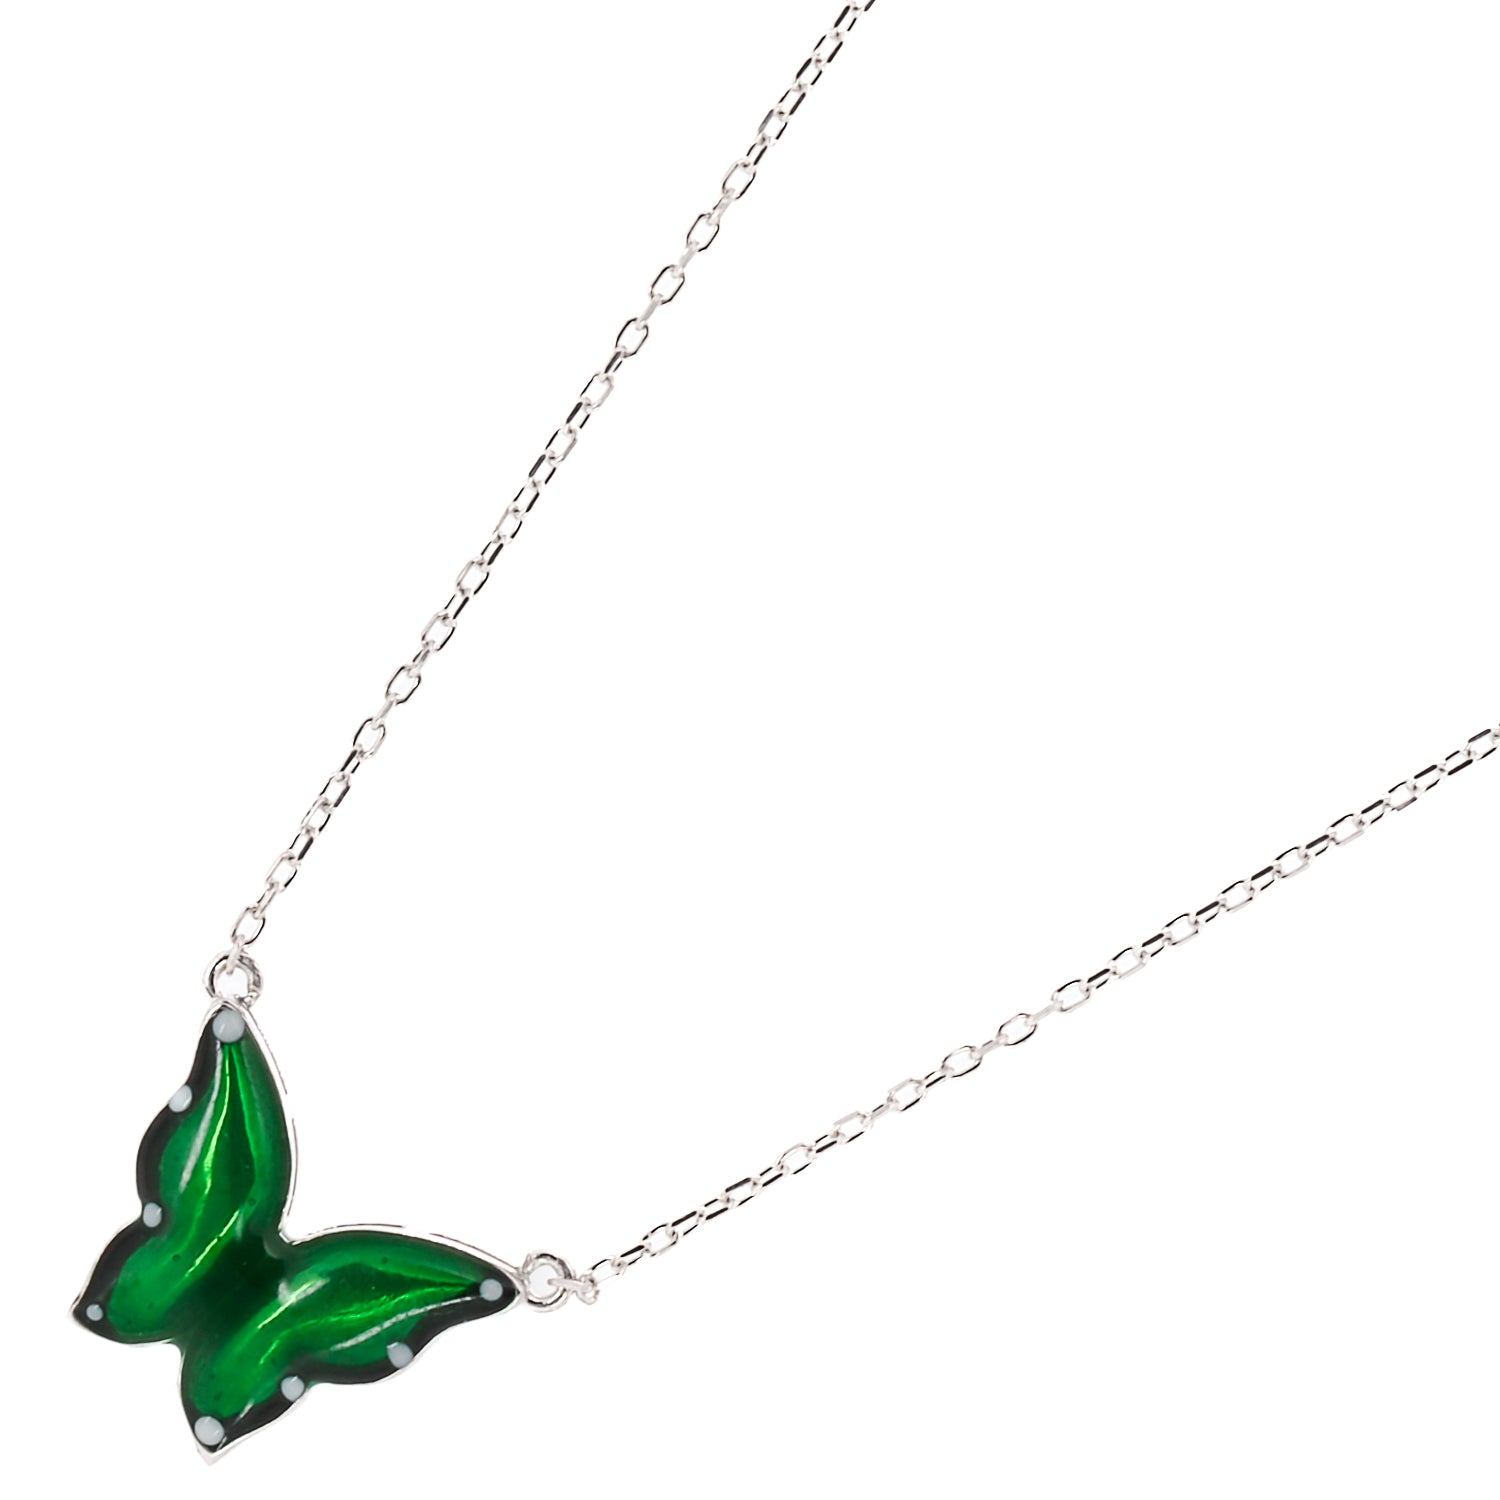 The Silver Abundance Green Enamel Butterfly Necklace, a meaningful and captivating addition to your jewelry collection.